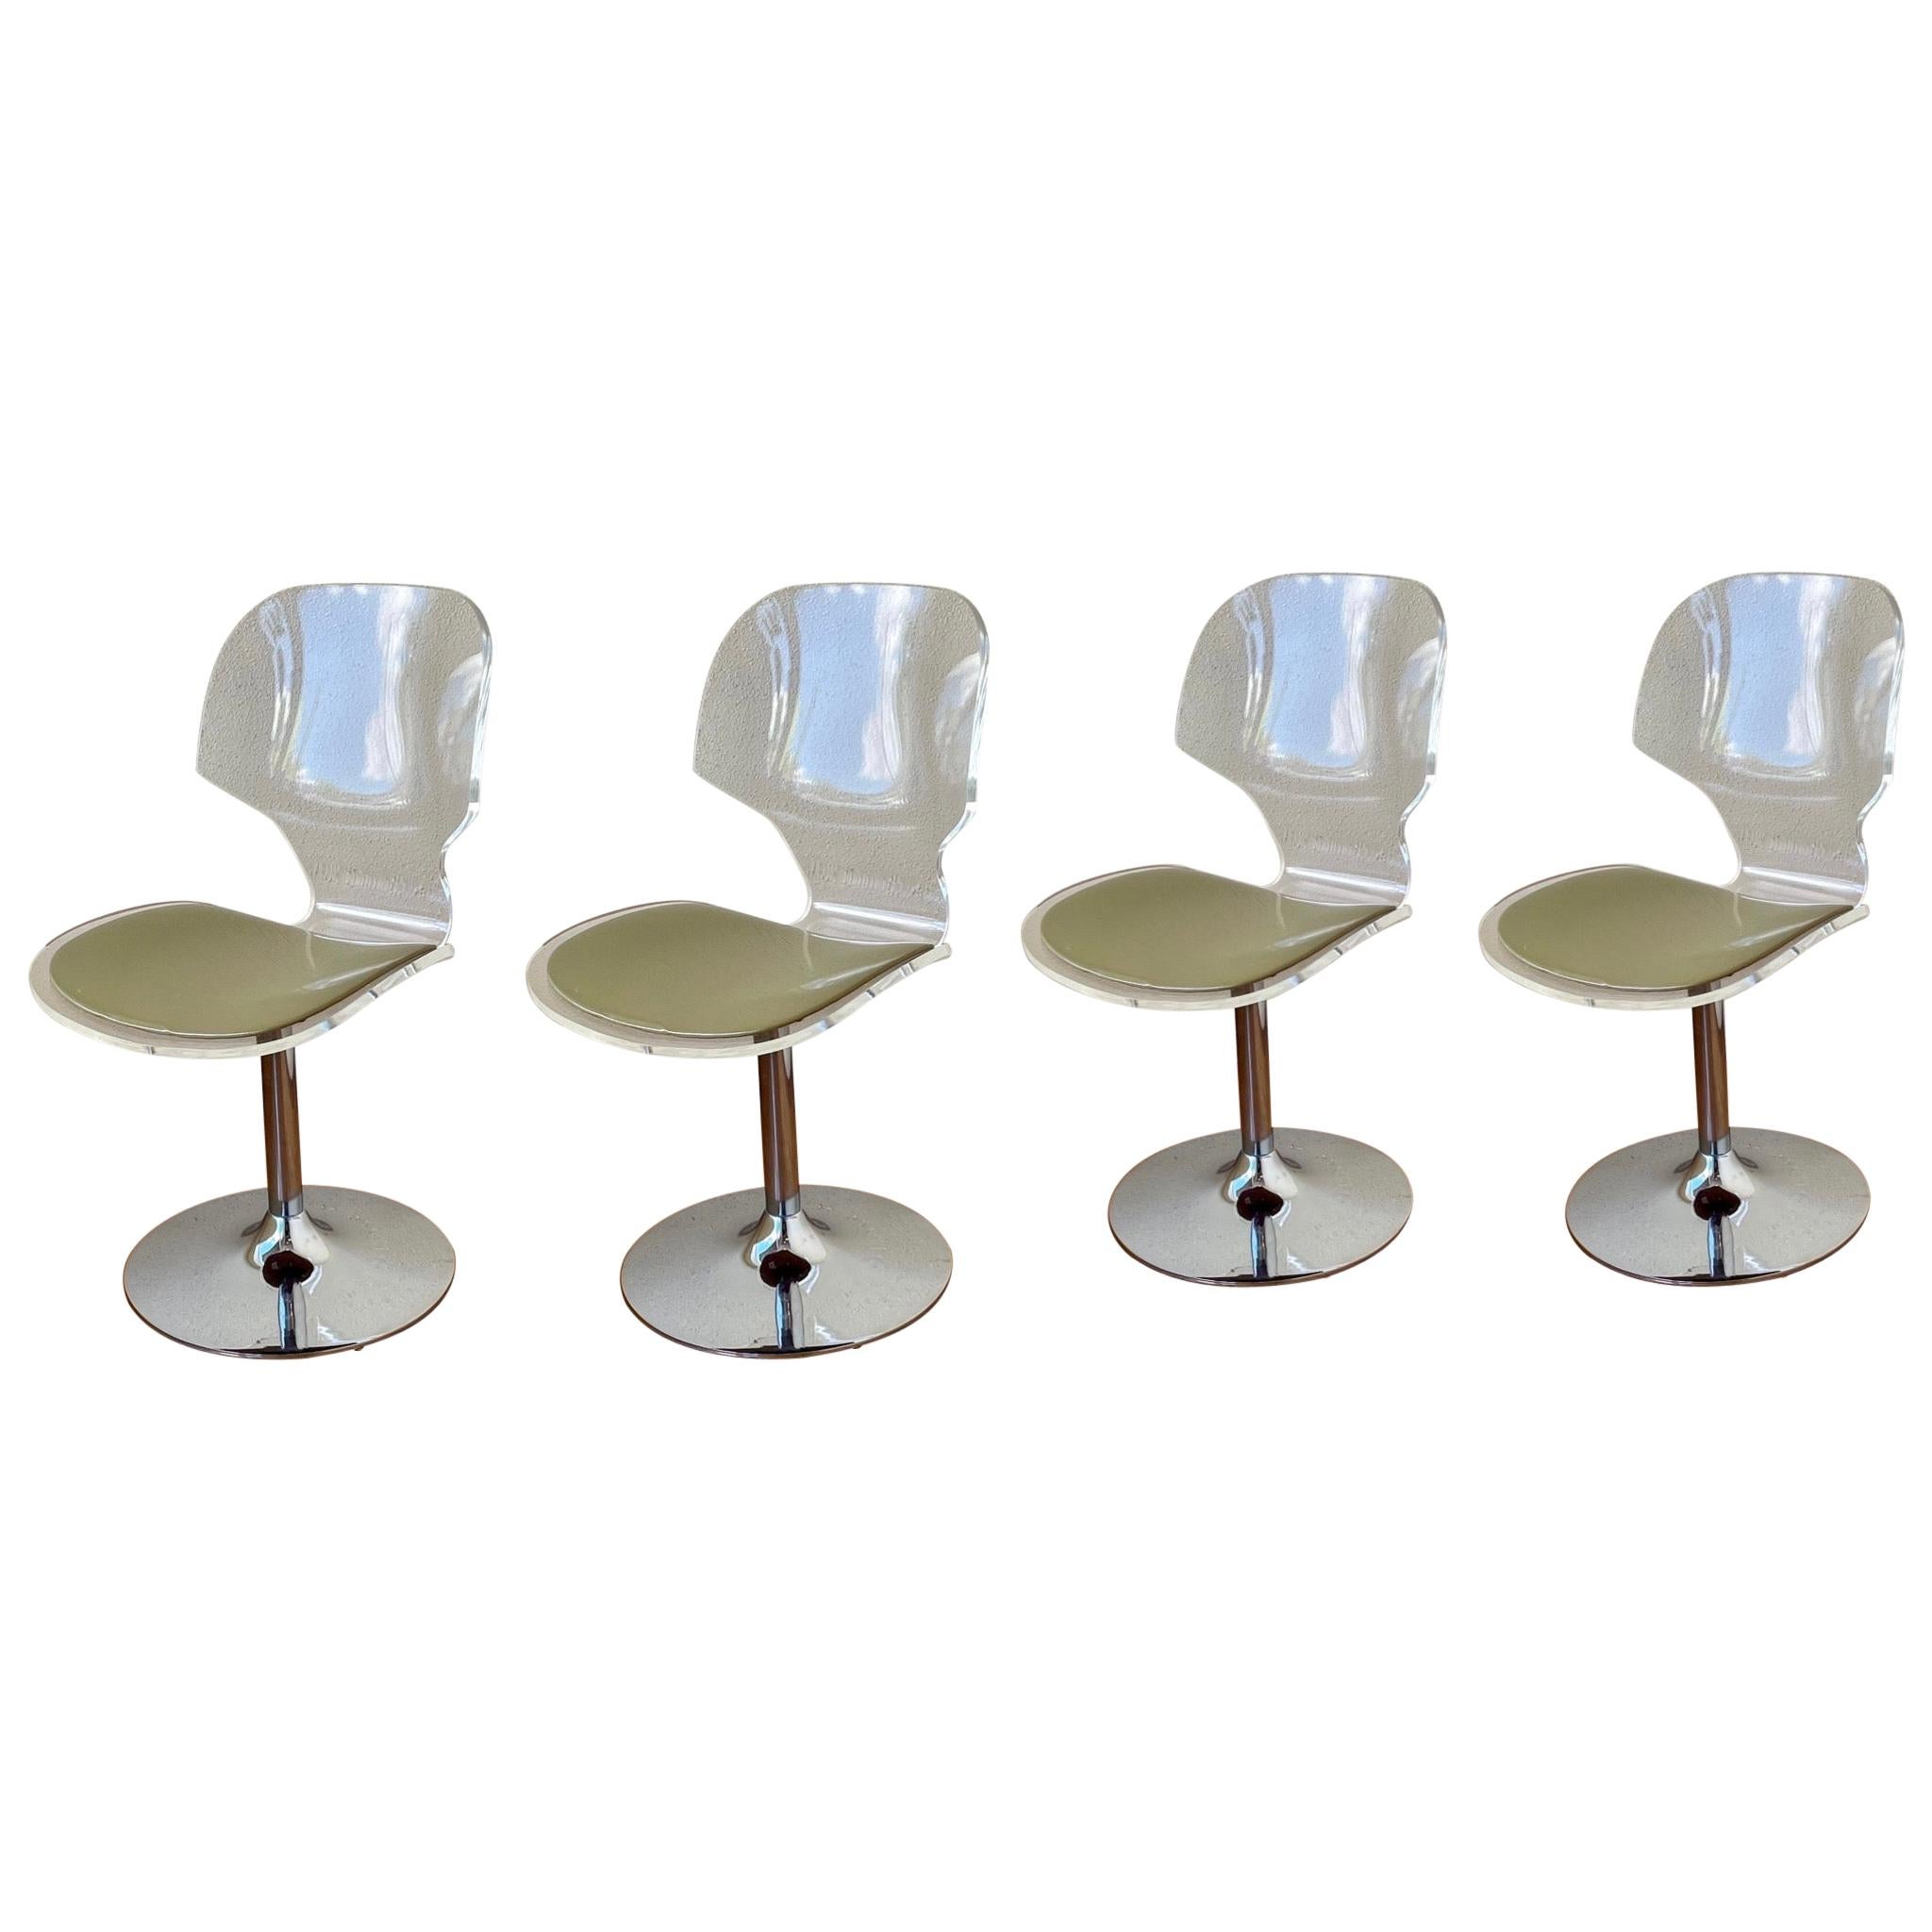 Striking Set of 4 Space Age Lucite and Chrome Swivel Chairs